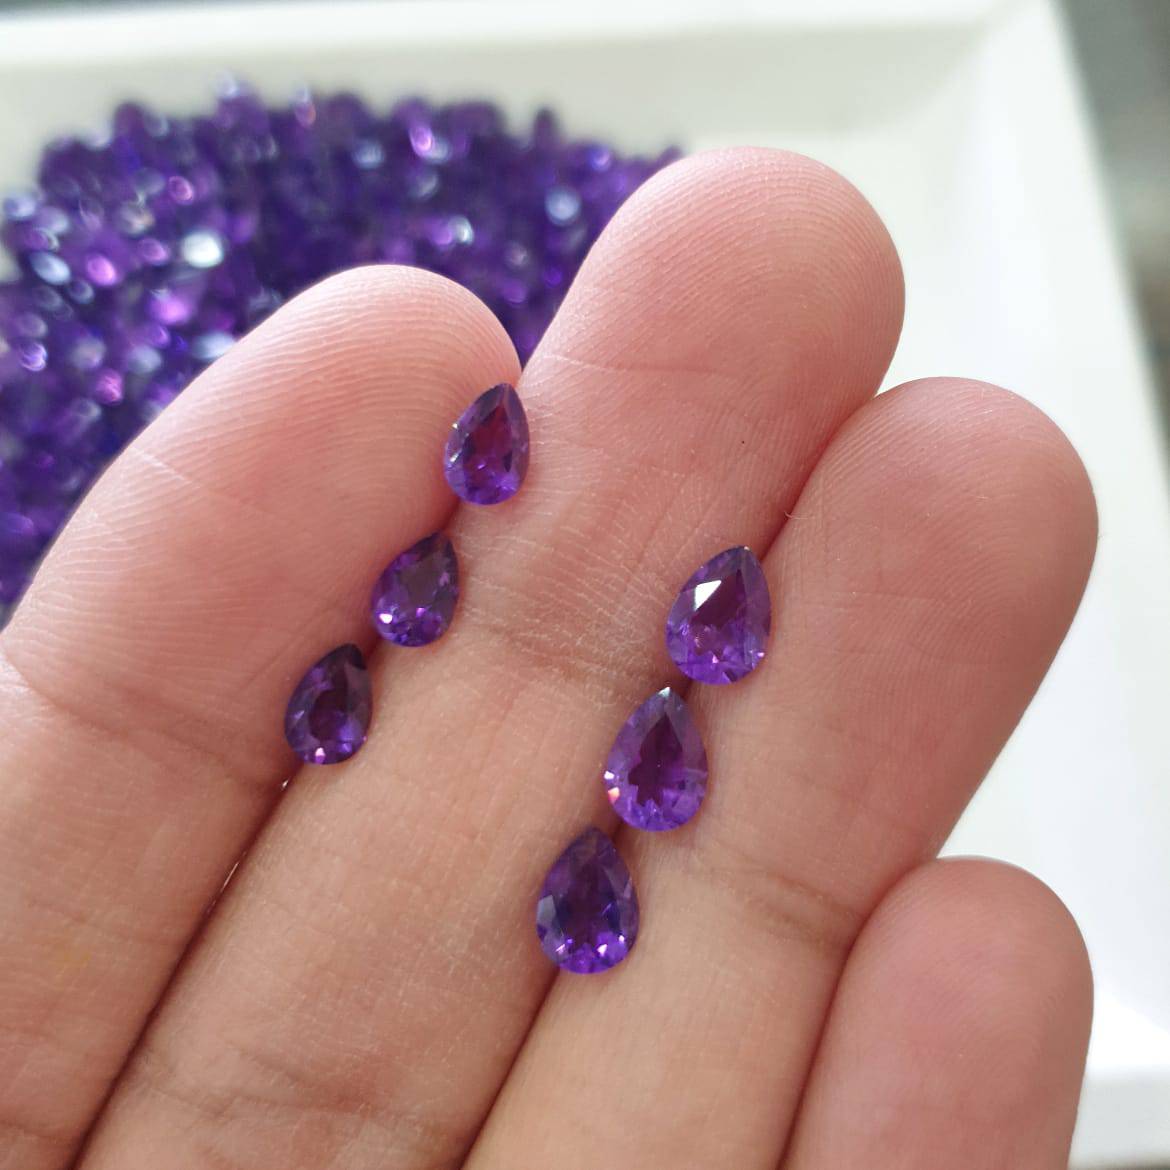 20 Pcs Amethyst Pears 6x4mm or 7x5mm | Top Quality Calibrated Size - The LabradoriteKing